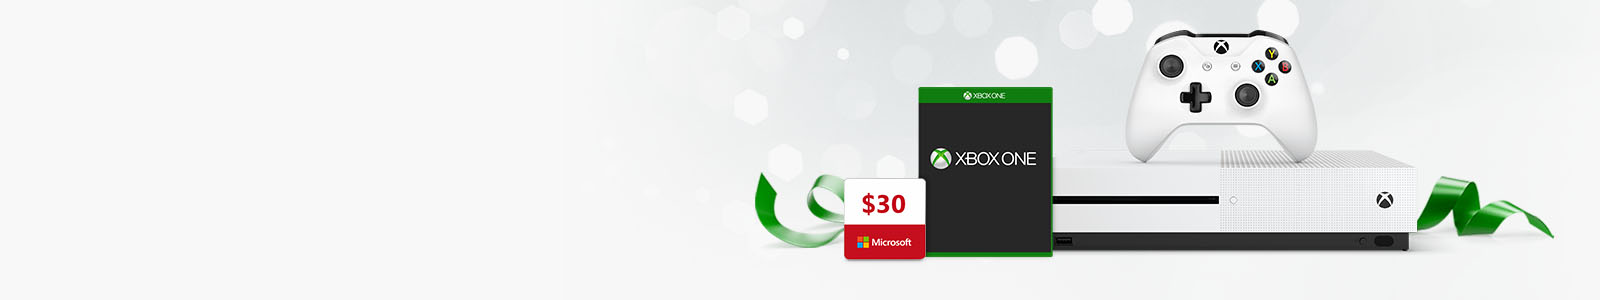 xbox_one_on_sale